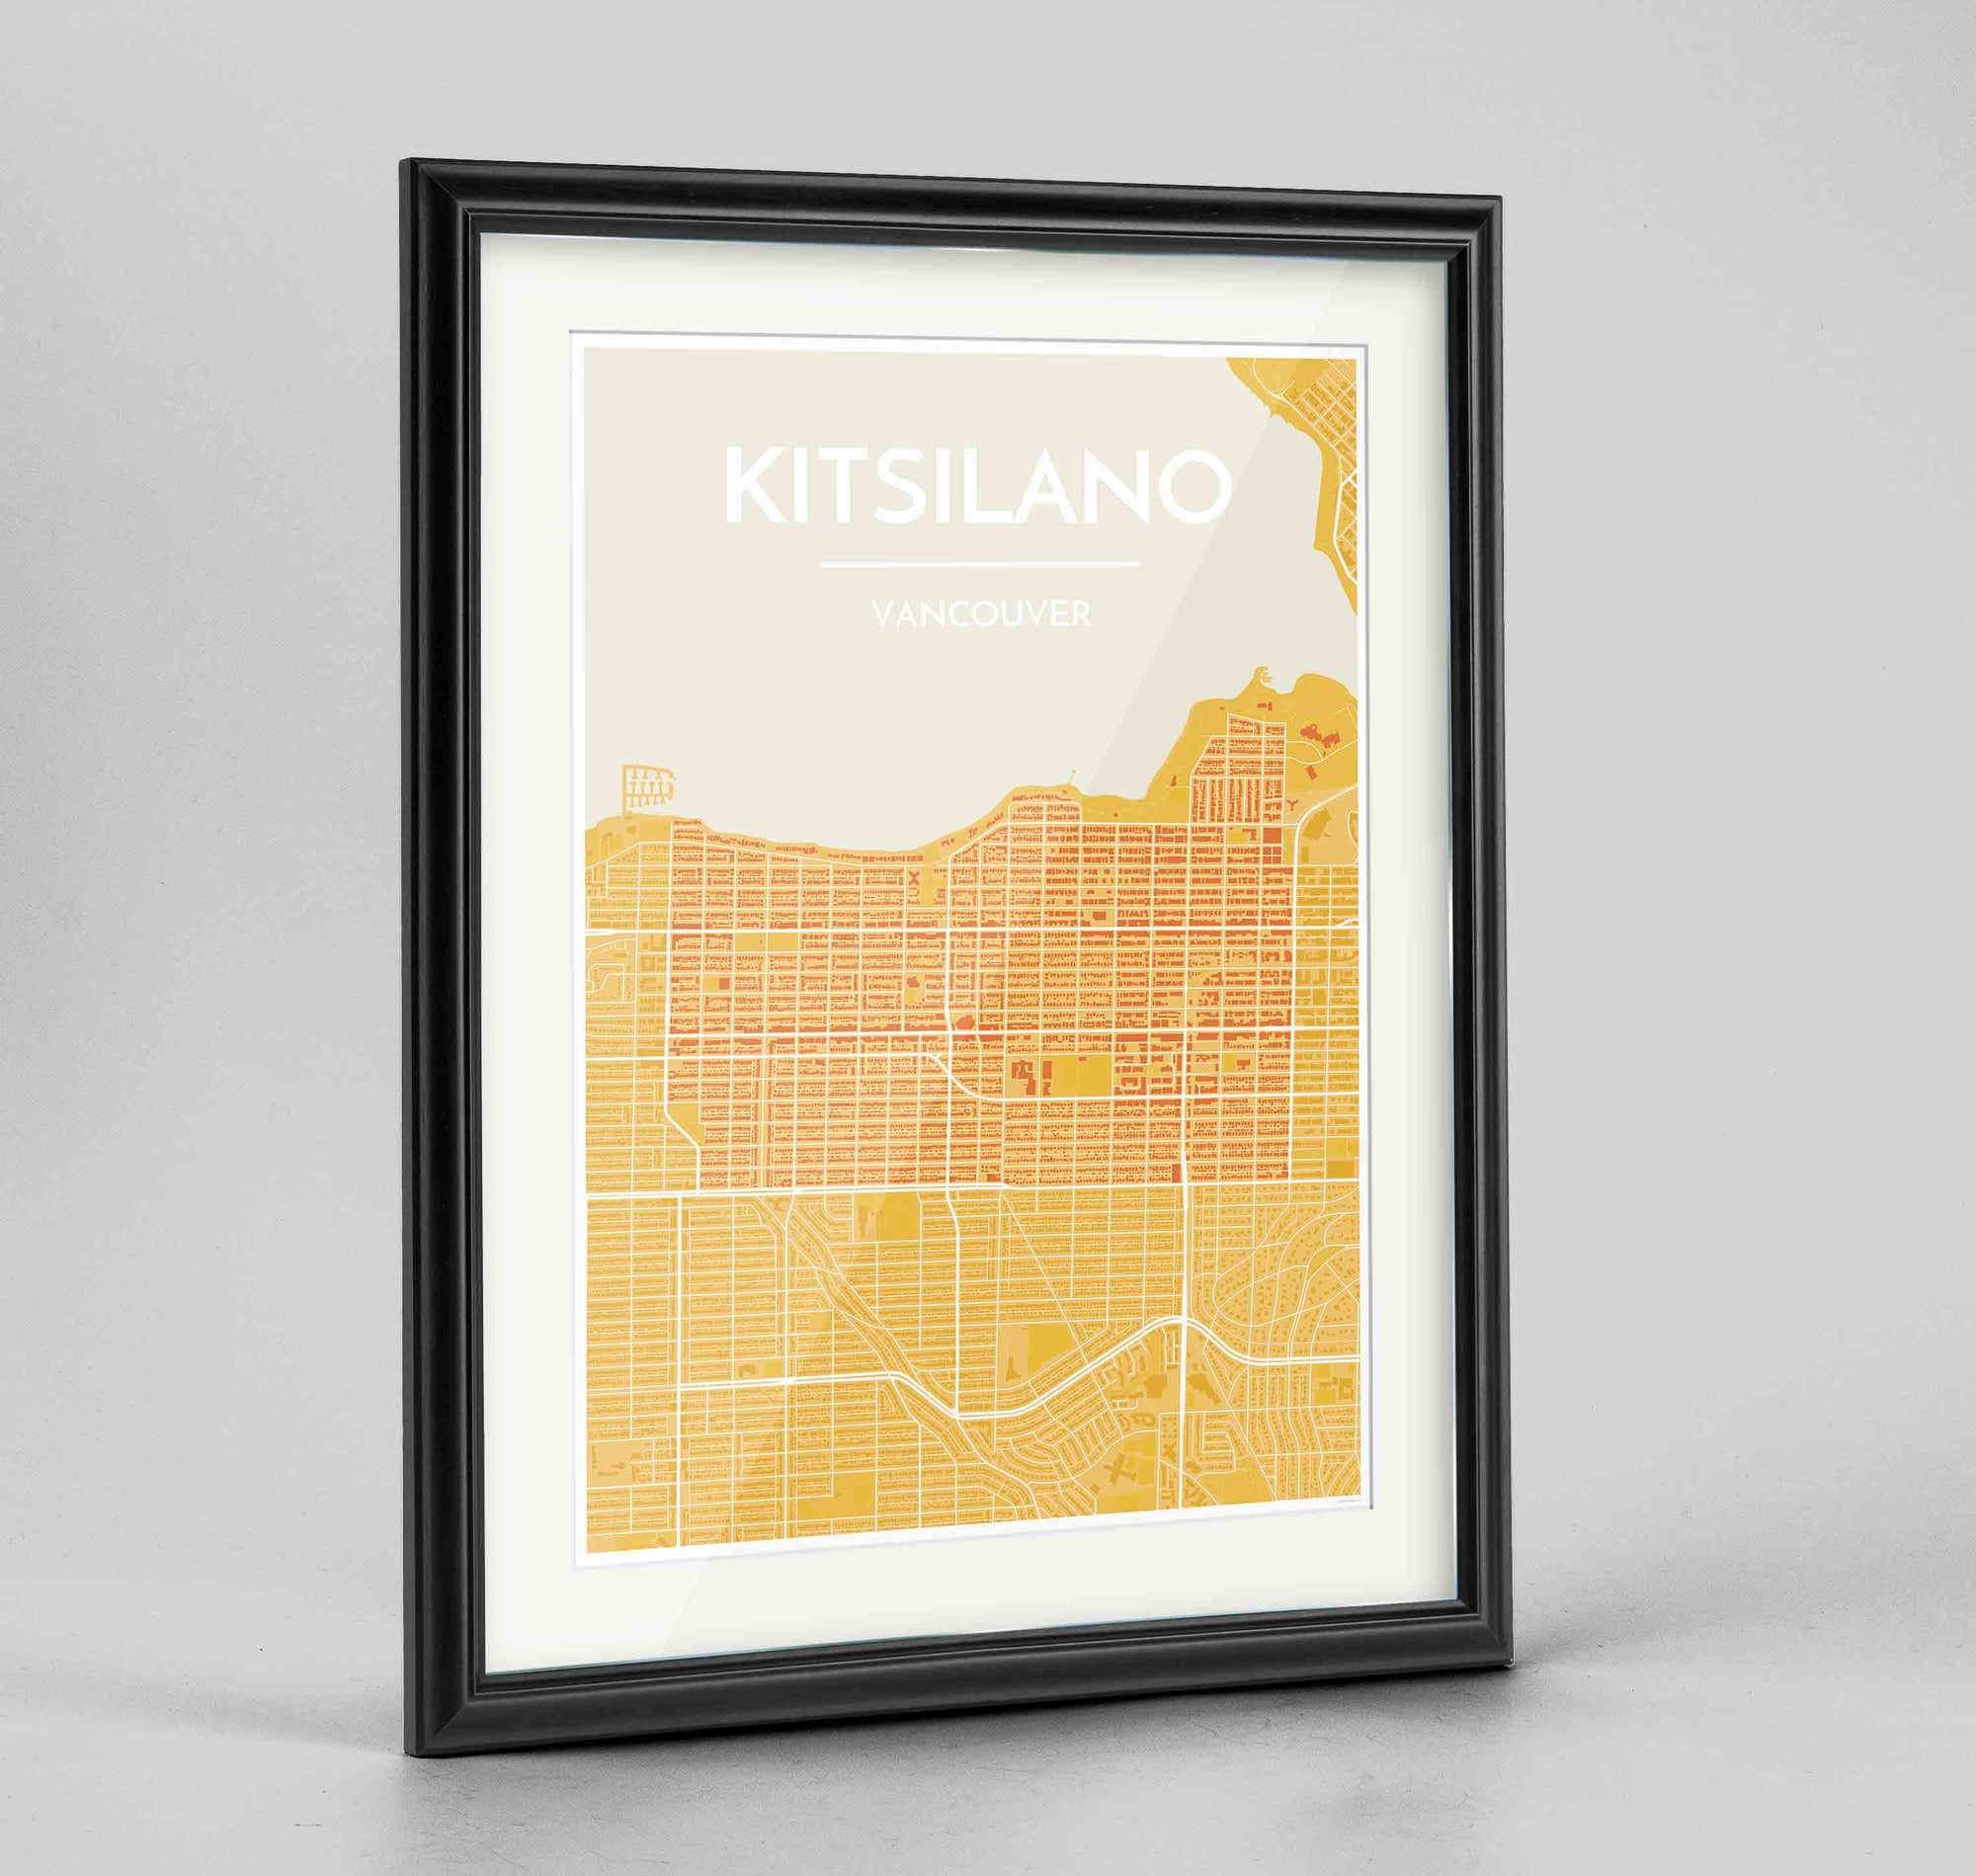 Framed Kitsilano Vancouver Map Art Print 24x36" Traditional Black frame Point Two Design Group